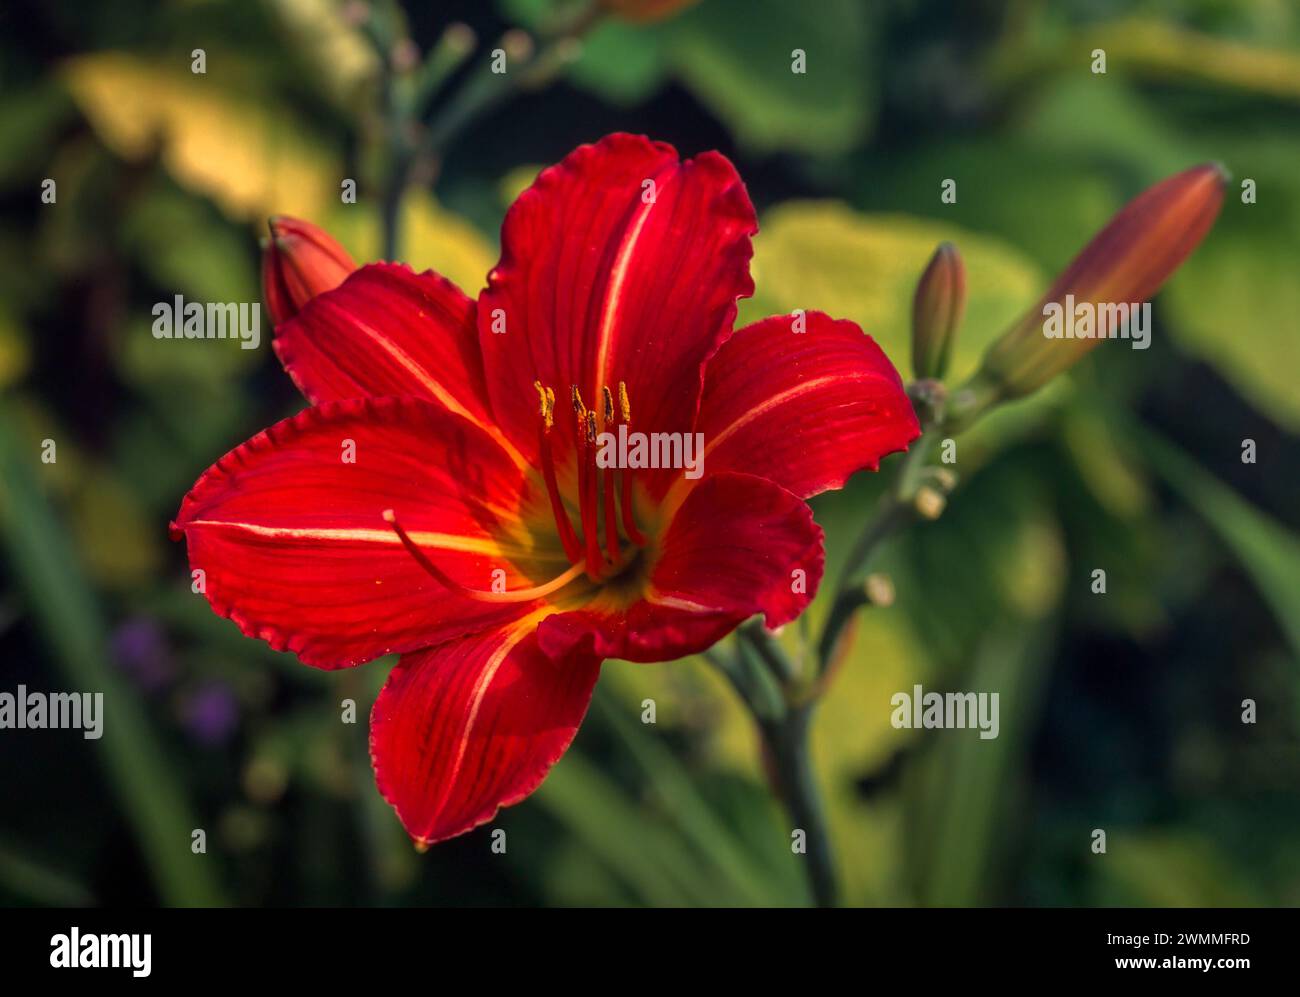 Closeup of a single bright red with yellow stripe Hemerocallis 'Stafford' daylily / lily flower growing in English Garden, England, UK Stock Photo